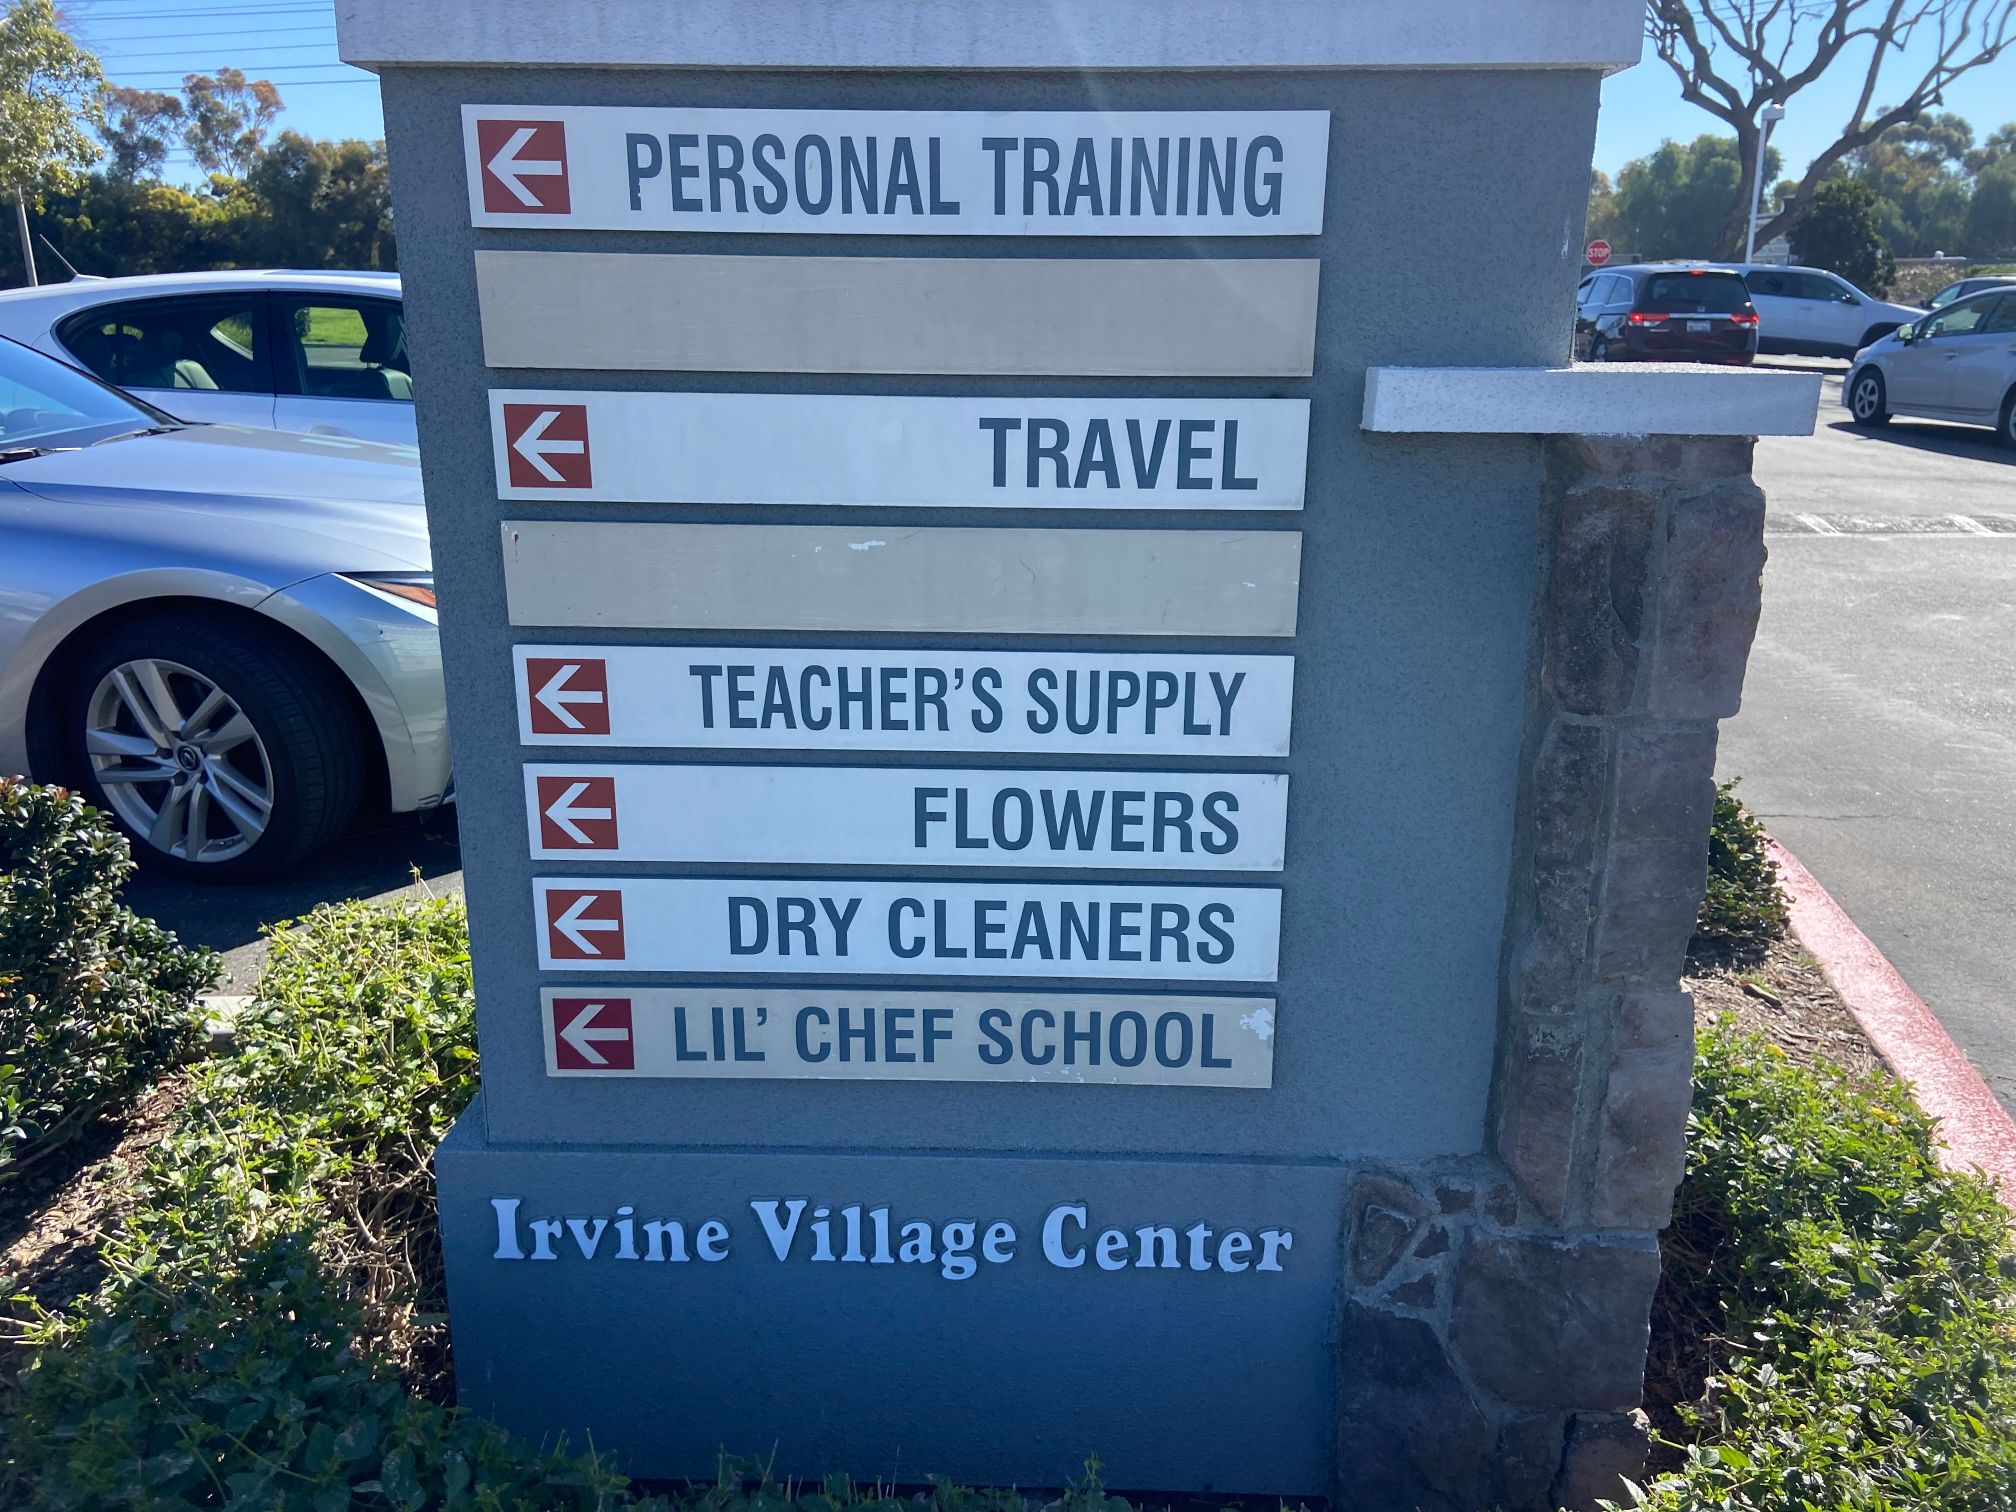 Property Management Companies in Irvine Need a Great Sign Company Partner for Wayfinding Signs and Tenant Changes!